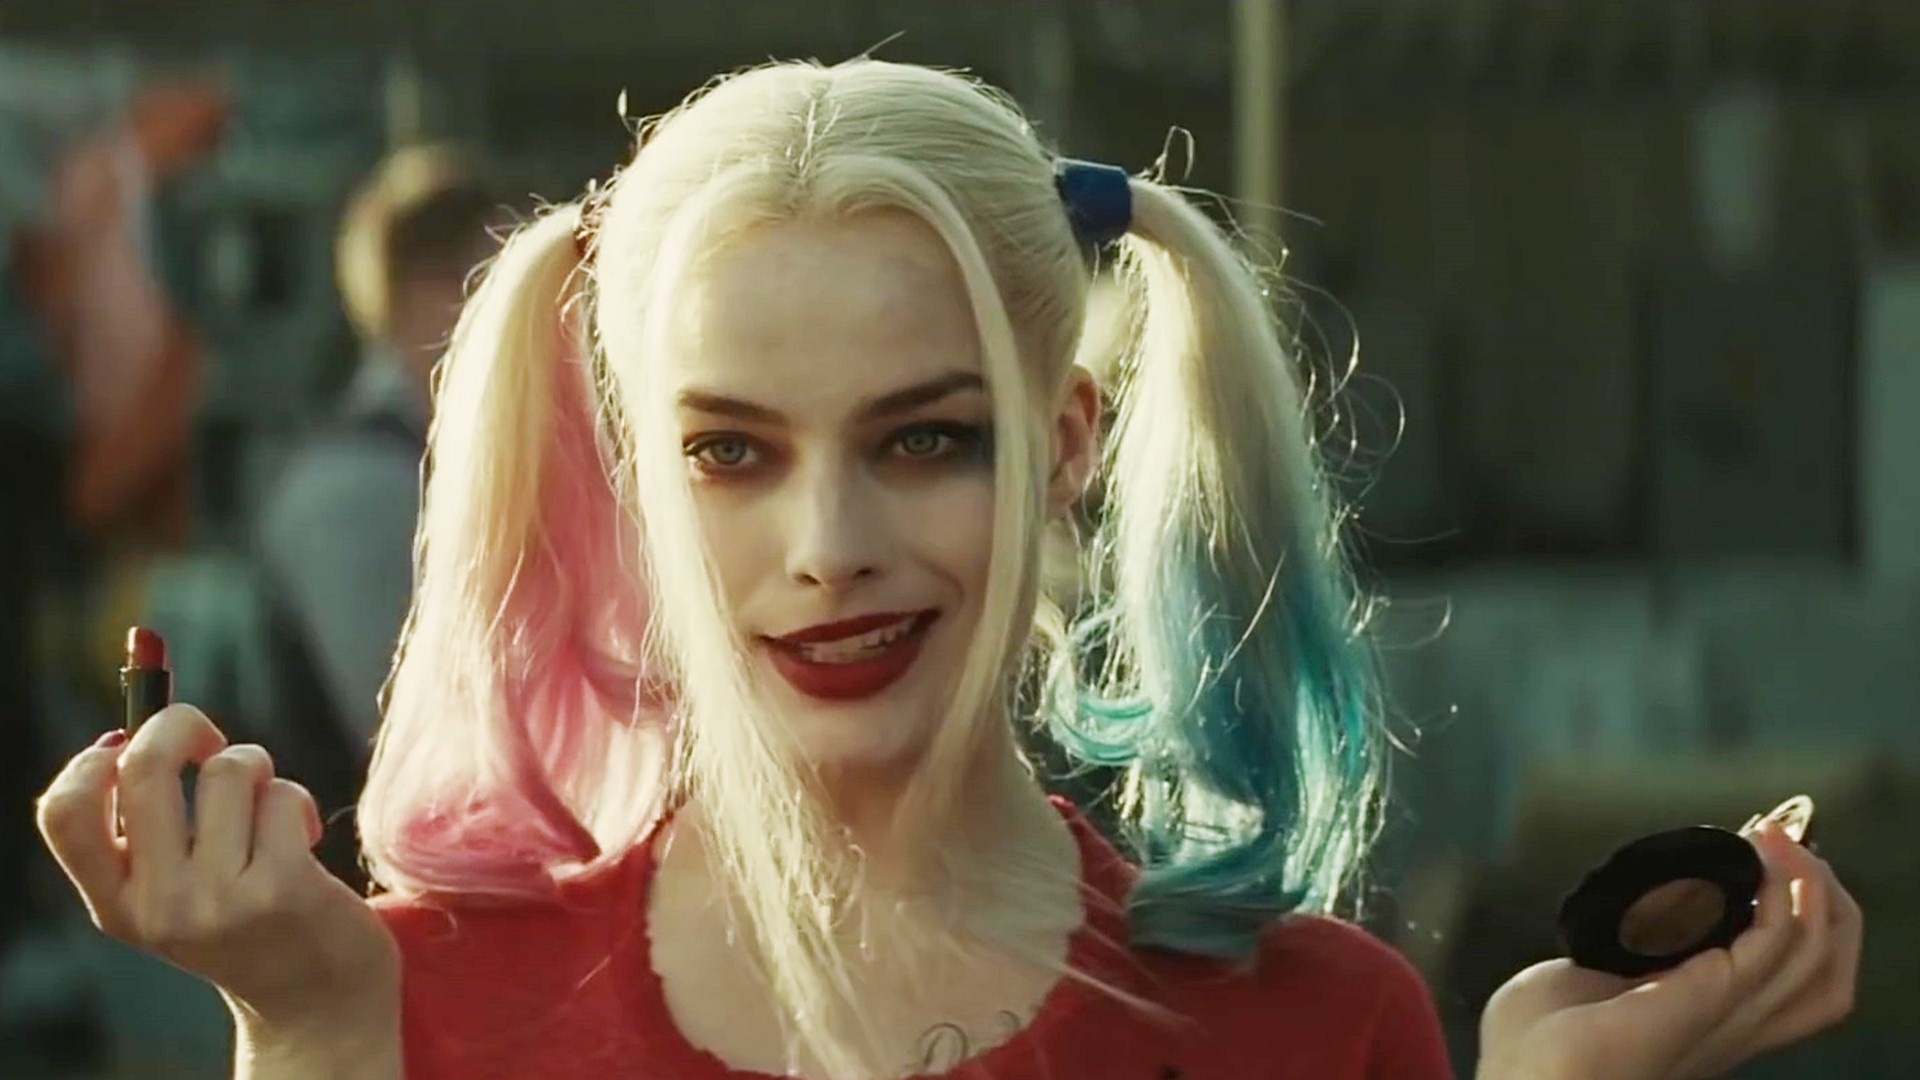 Harley Quinn in Suicide Squad, Margot Robbie's portrayal, Glamorous and dangerous, Memorable movie, 1920x1080 Full HD Desktop